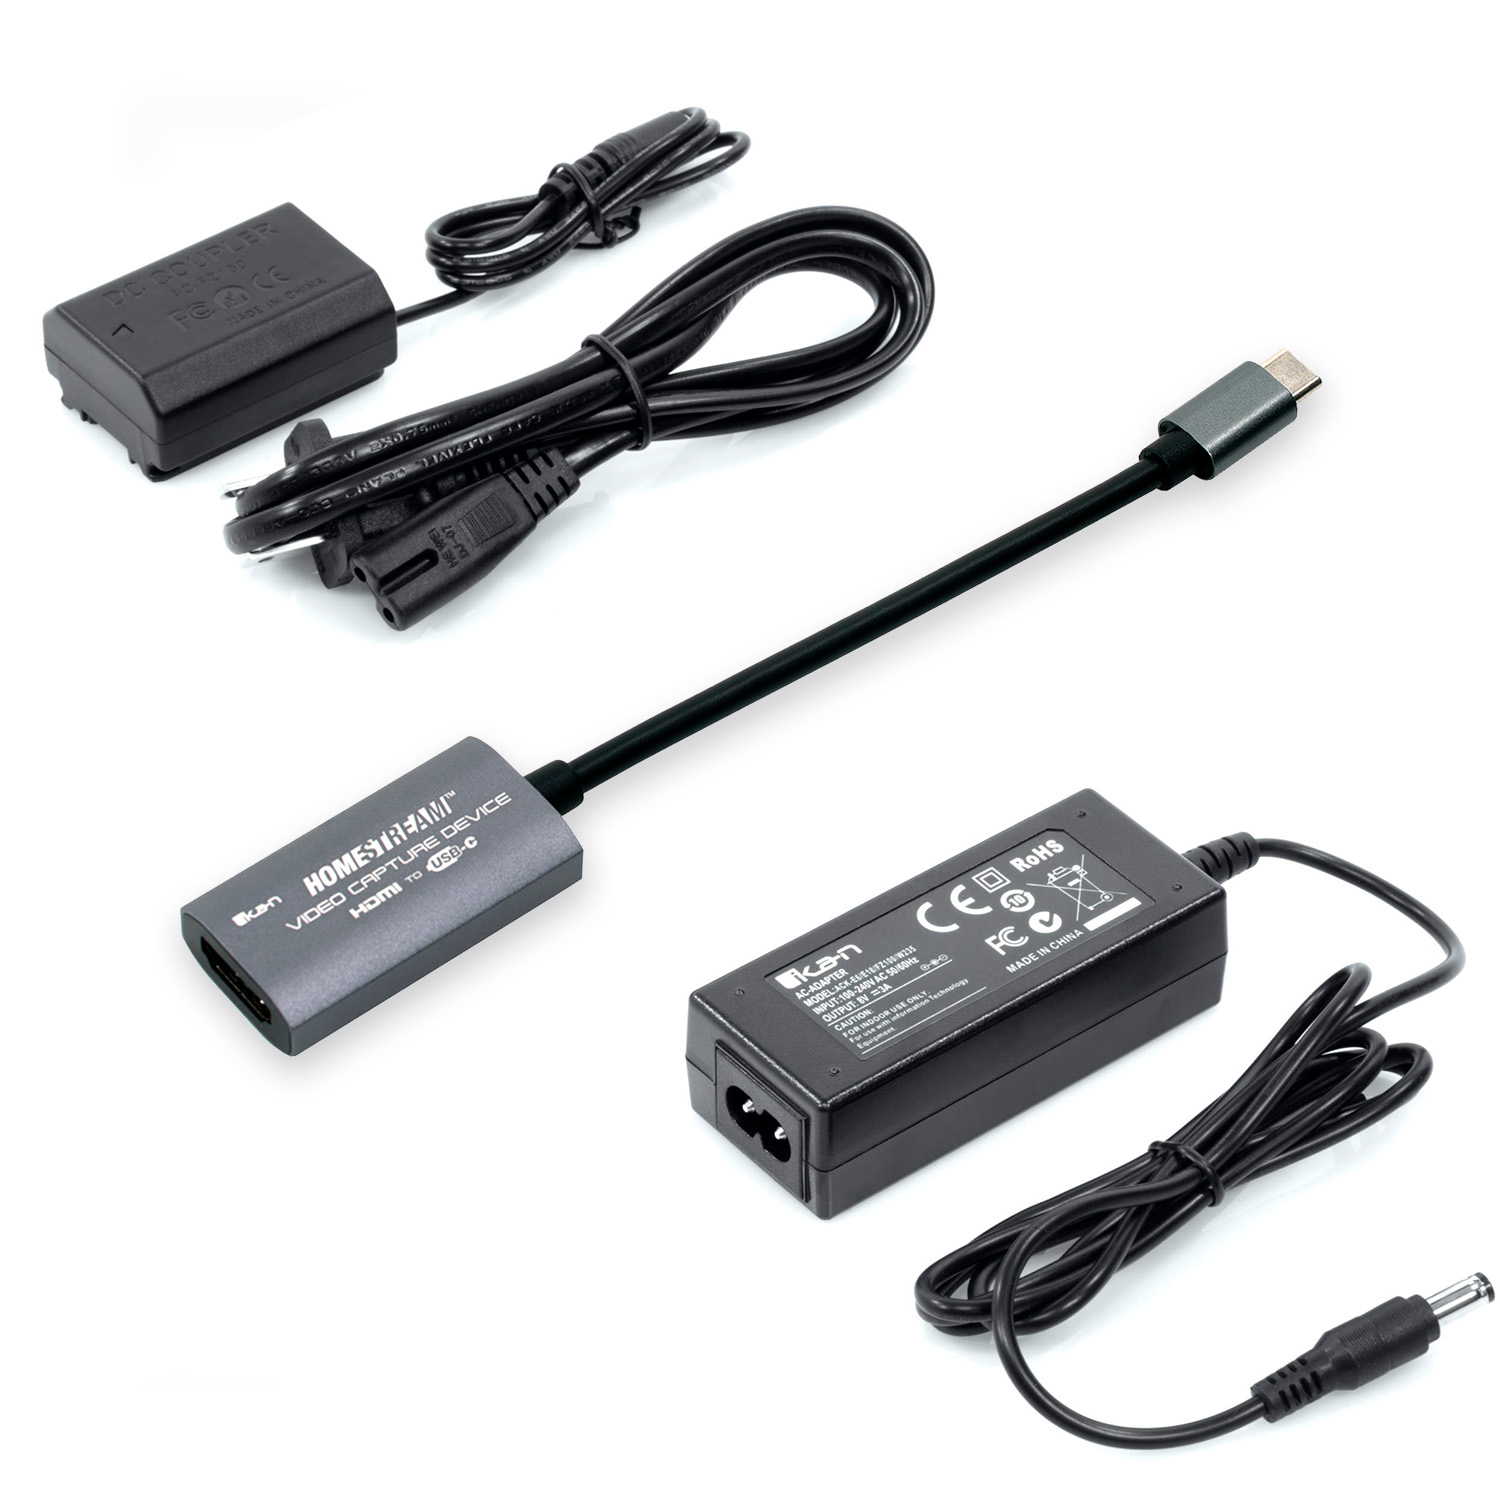 HDMI USBC Video Capture Device w/ STRATUS Dummy Battery for Sony Cameras - Ikan